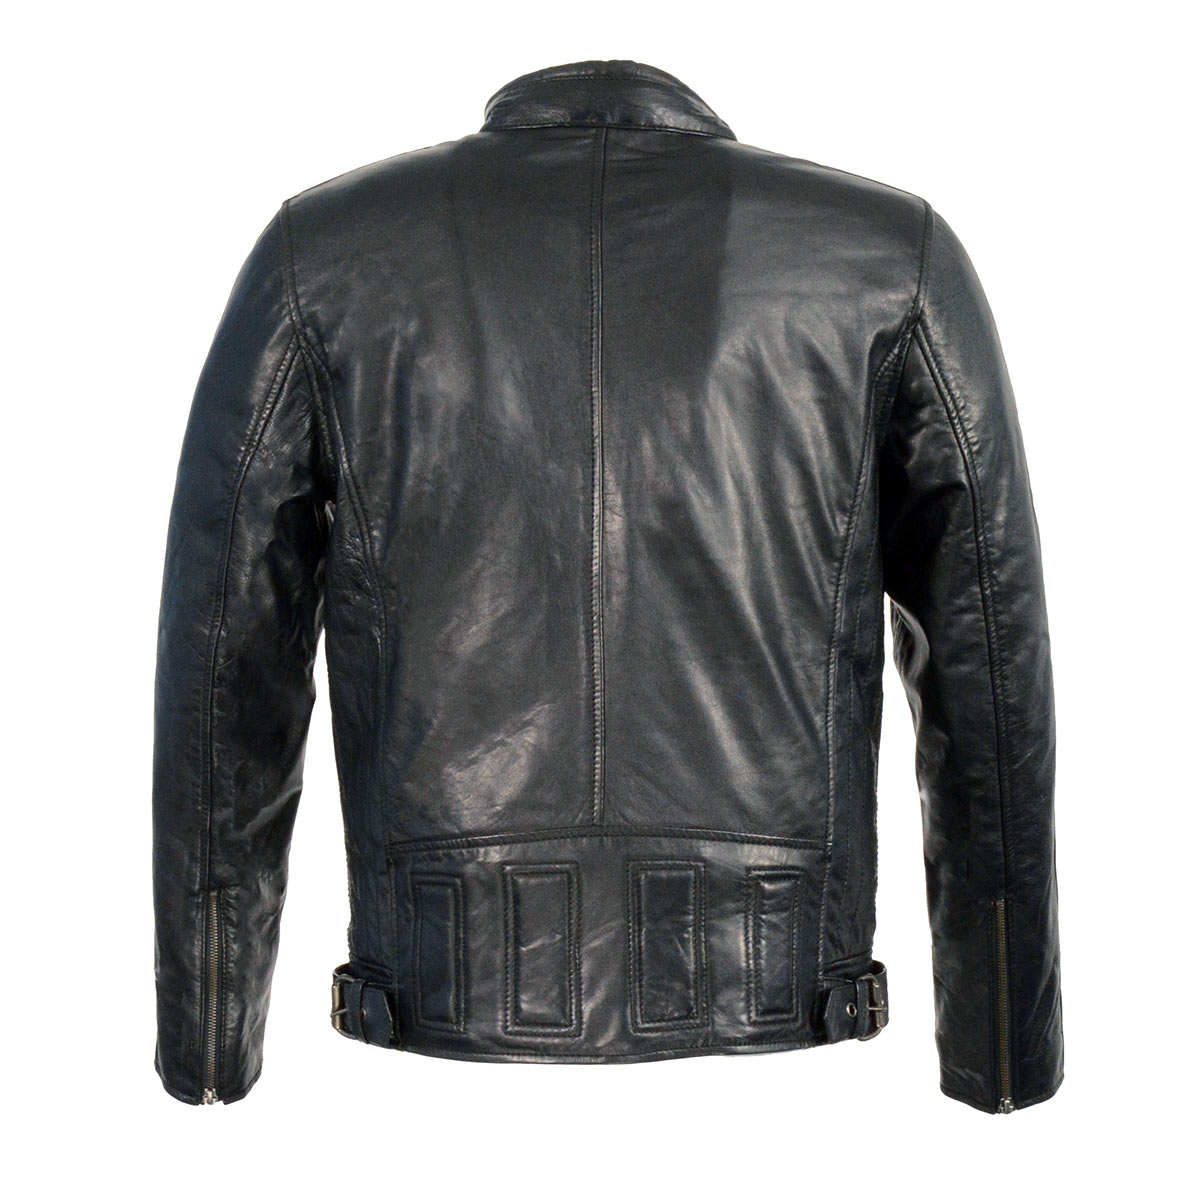 Milwaukee Leather SFM1835 Men's Black ‘Cafe Racer’ Leather Jacket with Snap Button Collar